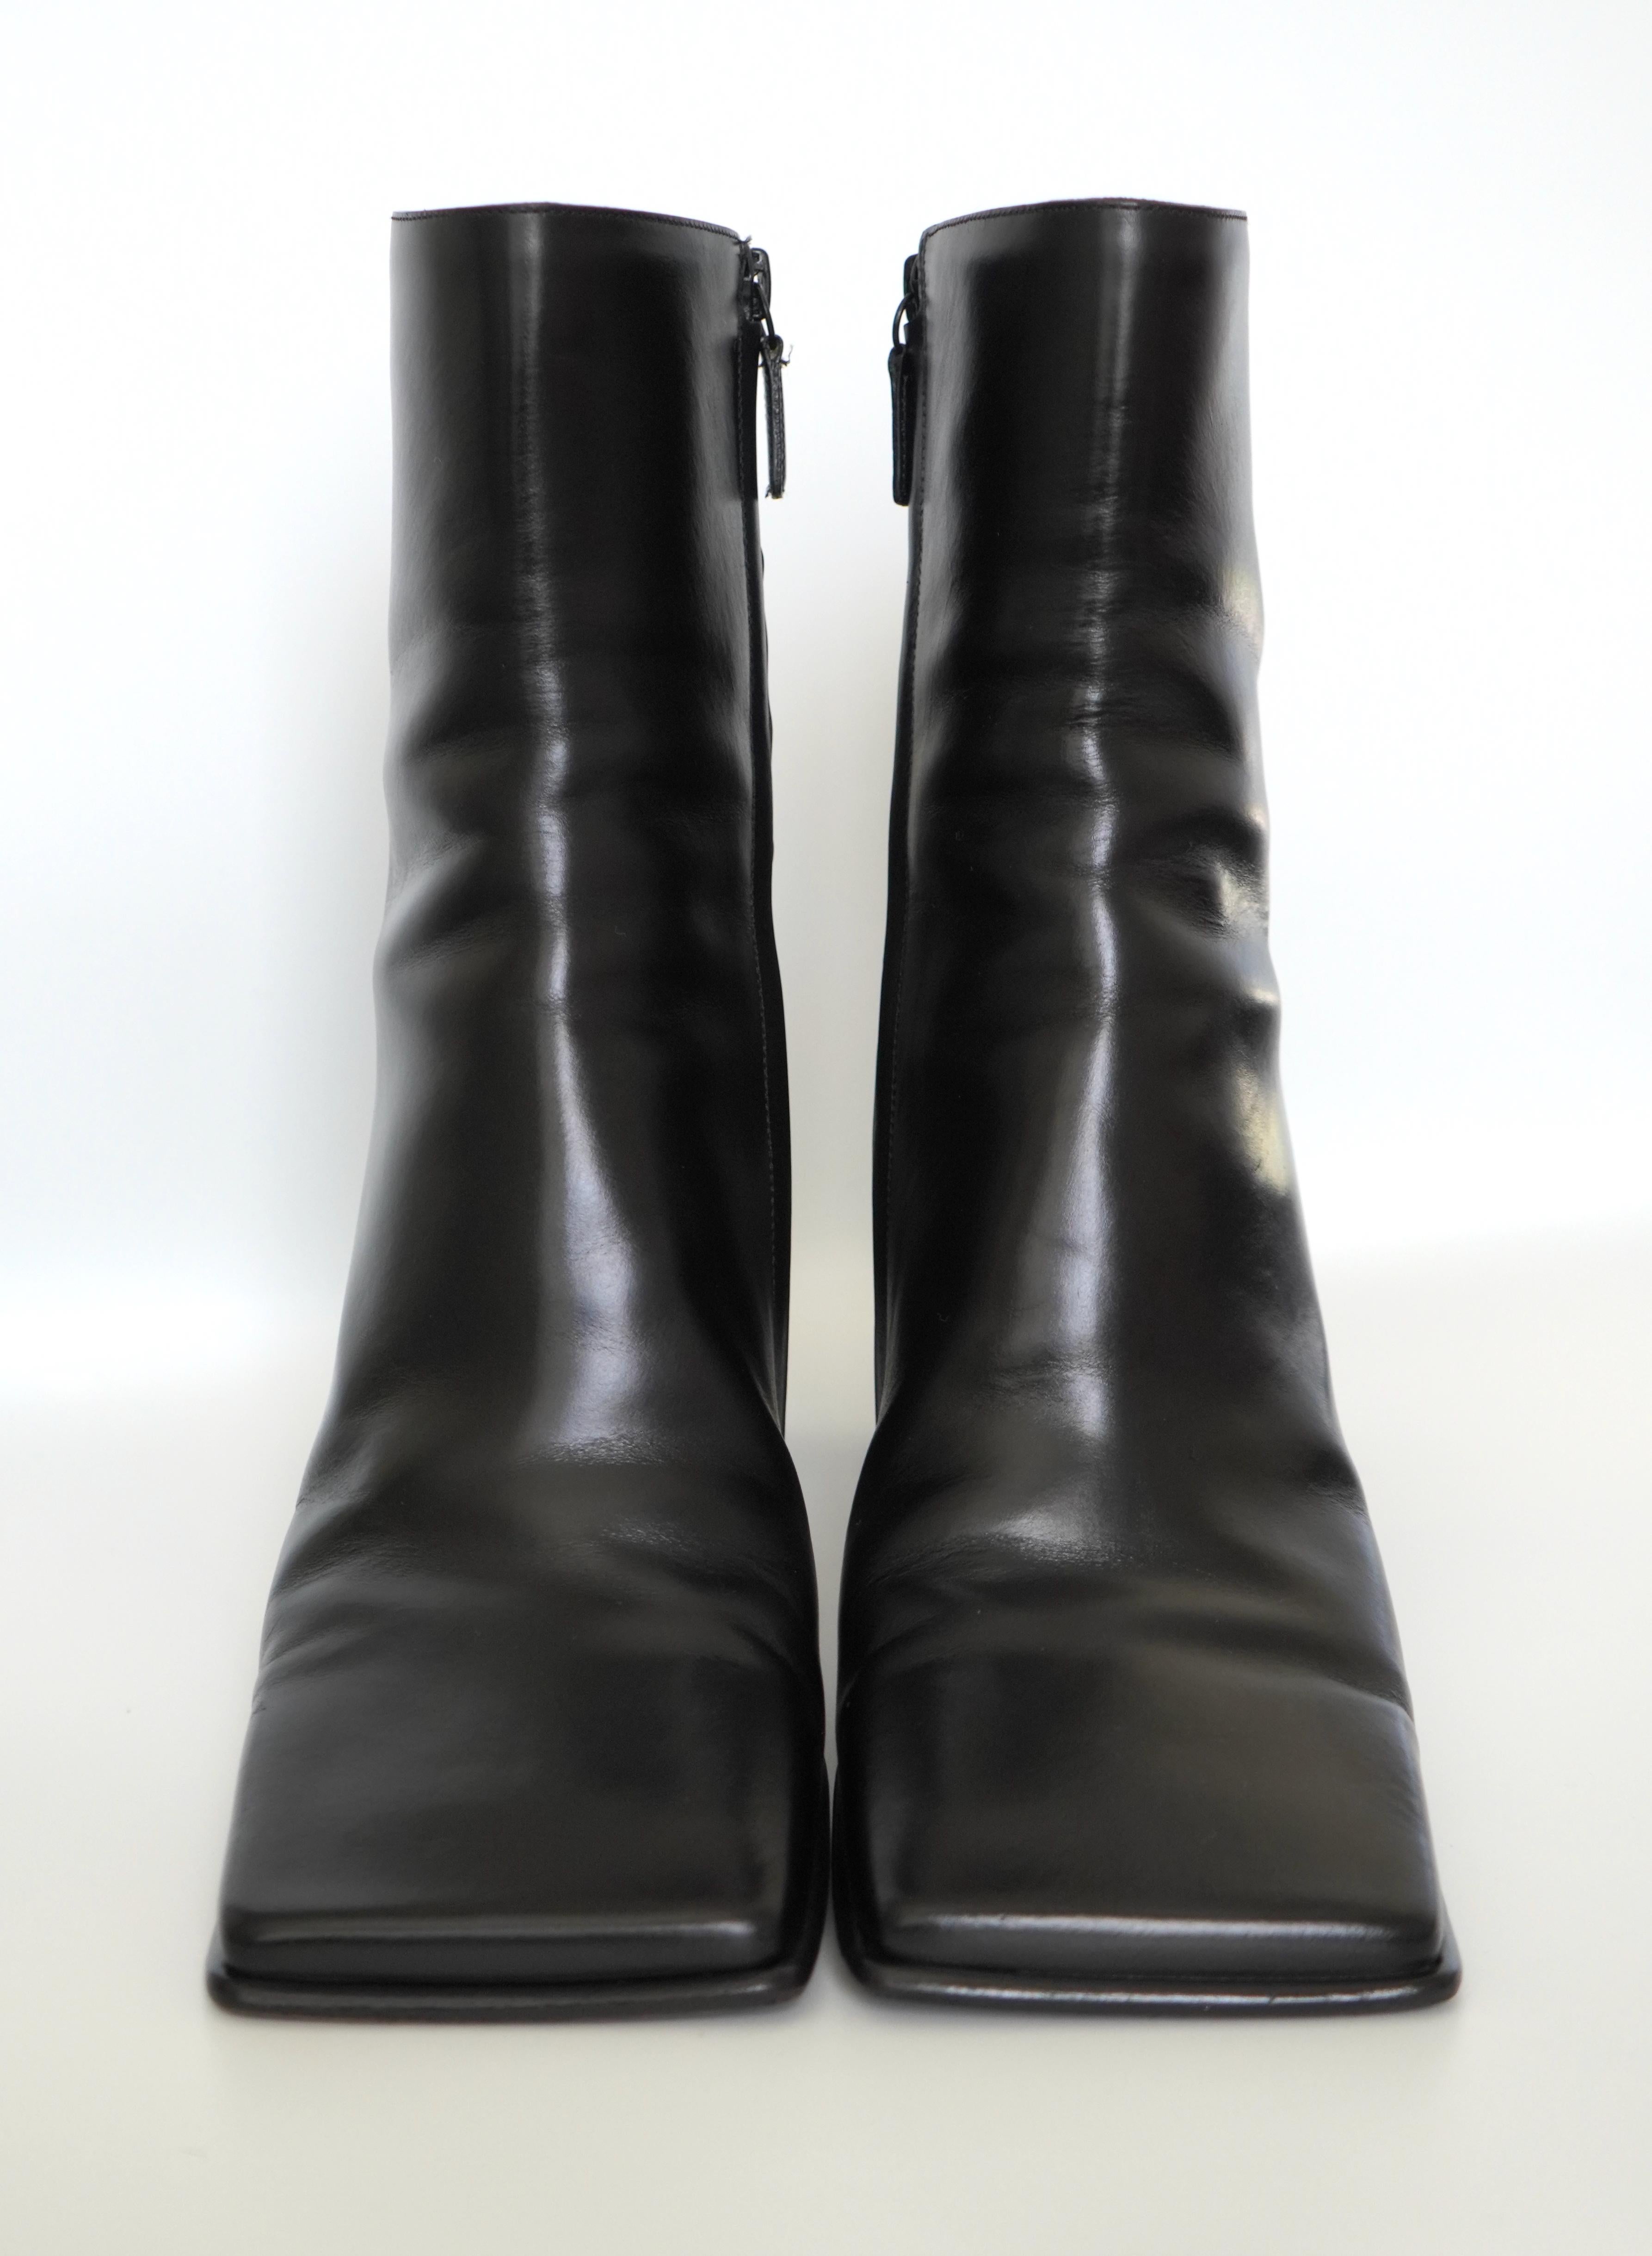 Balenciaga Moon Square Toe Leather Boots sz 40 In Good Condition For Sale In Beverly Hills, CA